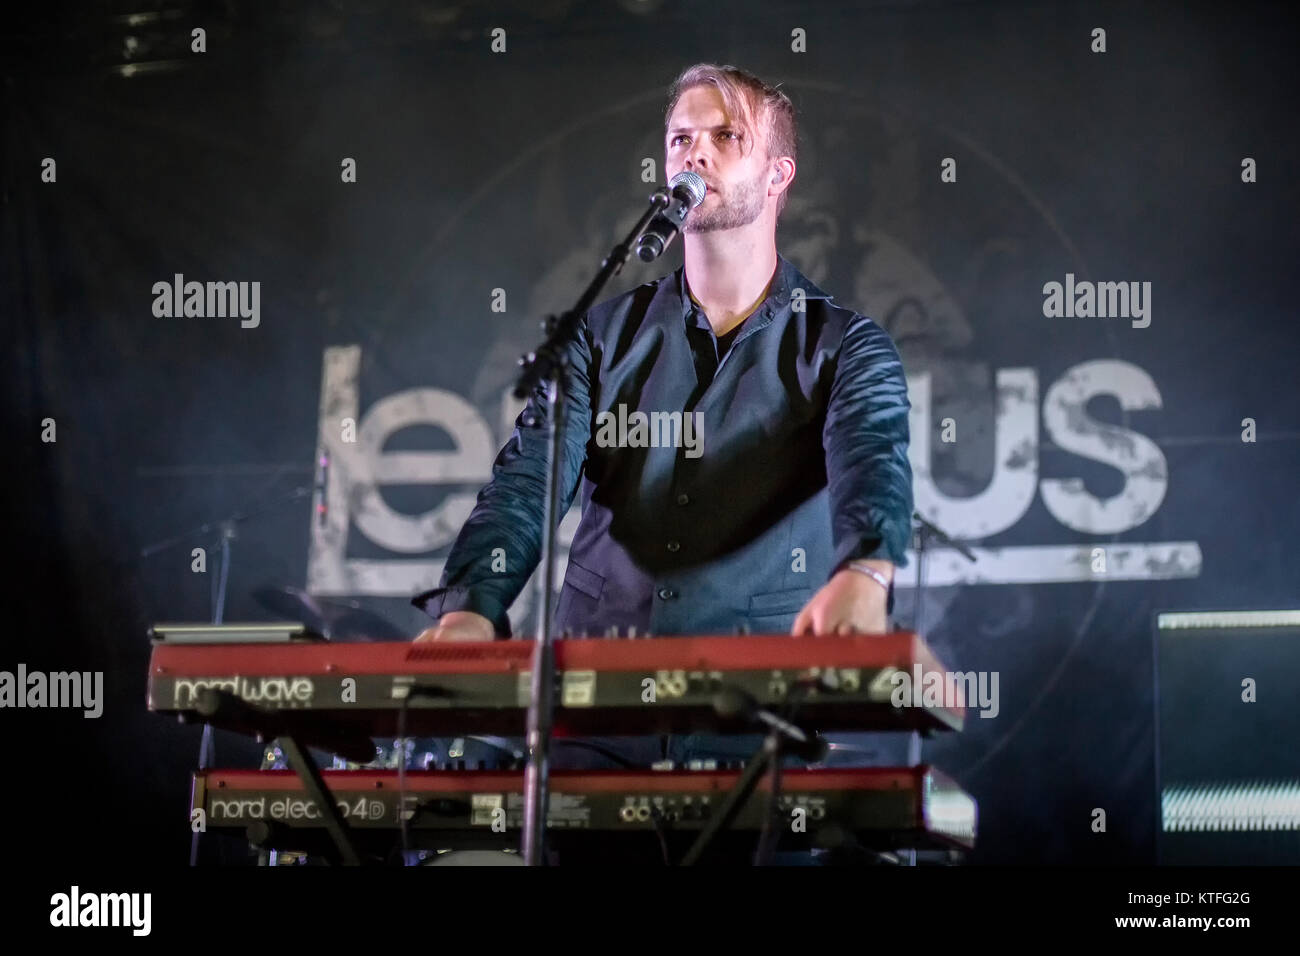 The Norwegian progressive metal band Leprous performs a live concert at the Norwegian music festival Tons of Rock 2016. Here vocalist and musician Einar Solberg is seen live on stage. Norway, 23/06 2016. Stock Photo